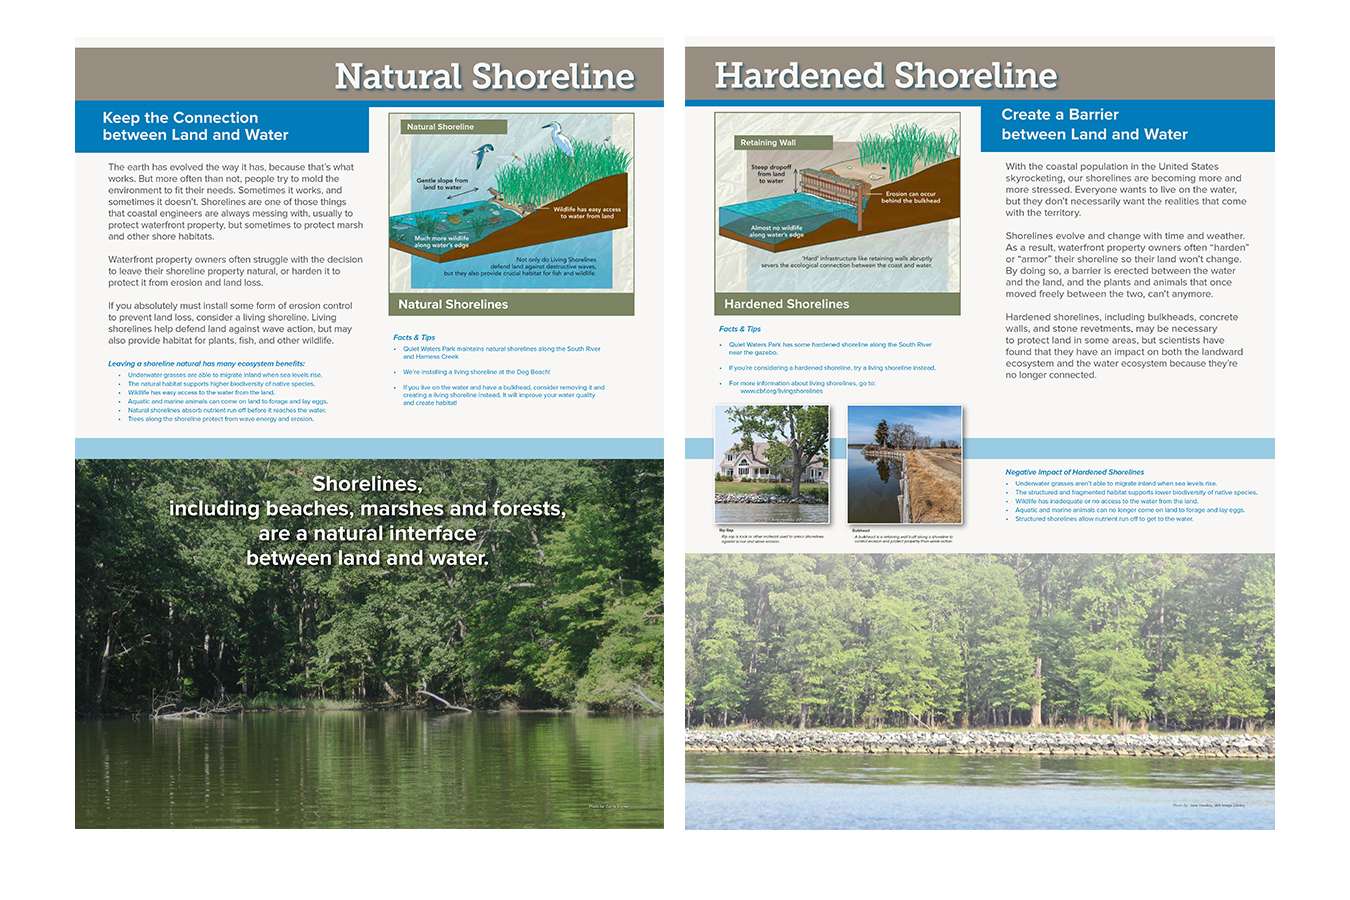 11G4 QWP 30x40 4 Nat Hard Shrline : Typical shoreline Panels compare and contrast environmental conditions at the park